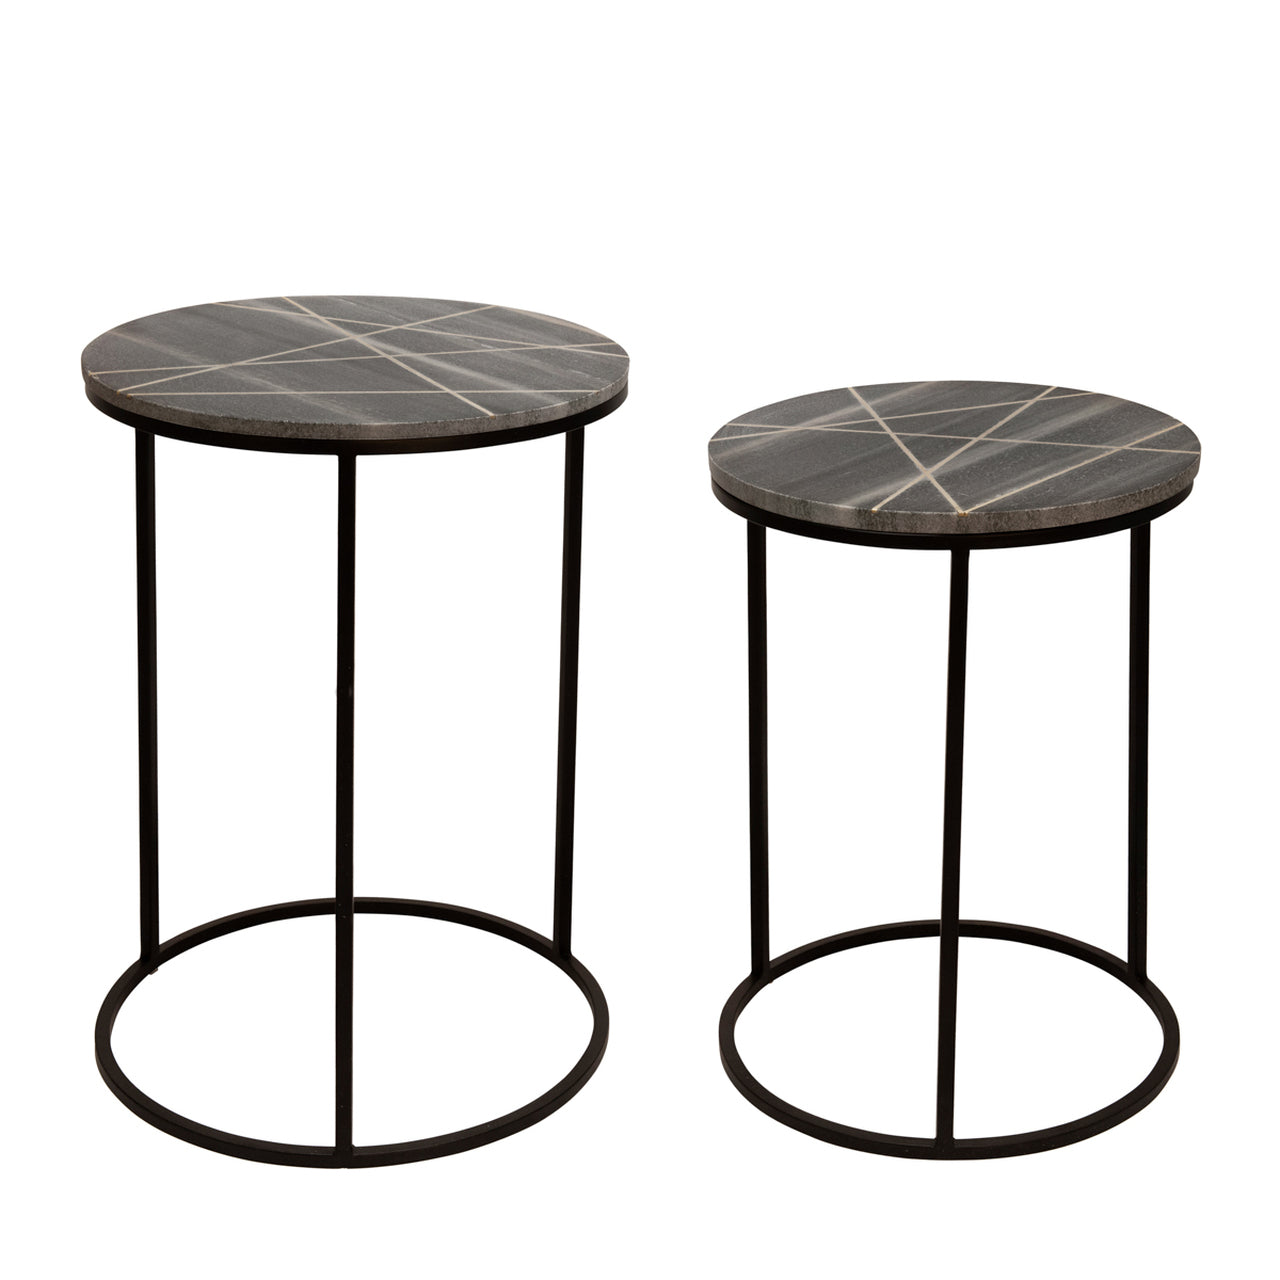 METAL/ MARBLE SIDE TABLE W-GOLD INLAYS, BLACK